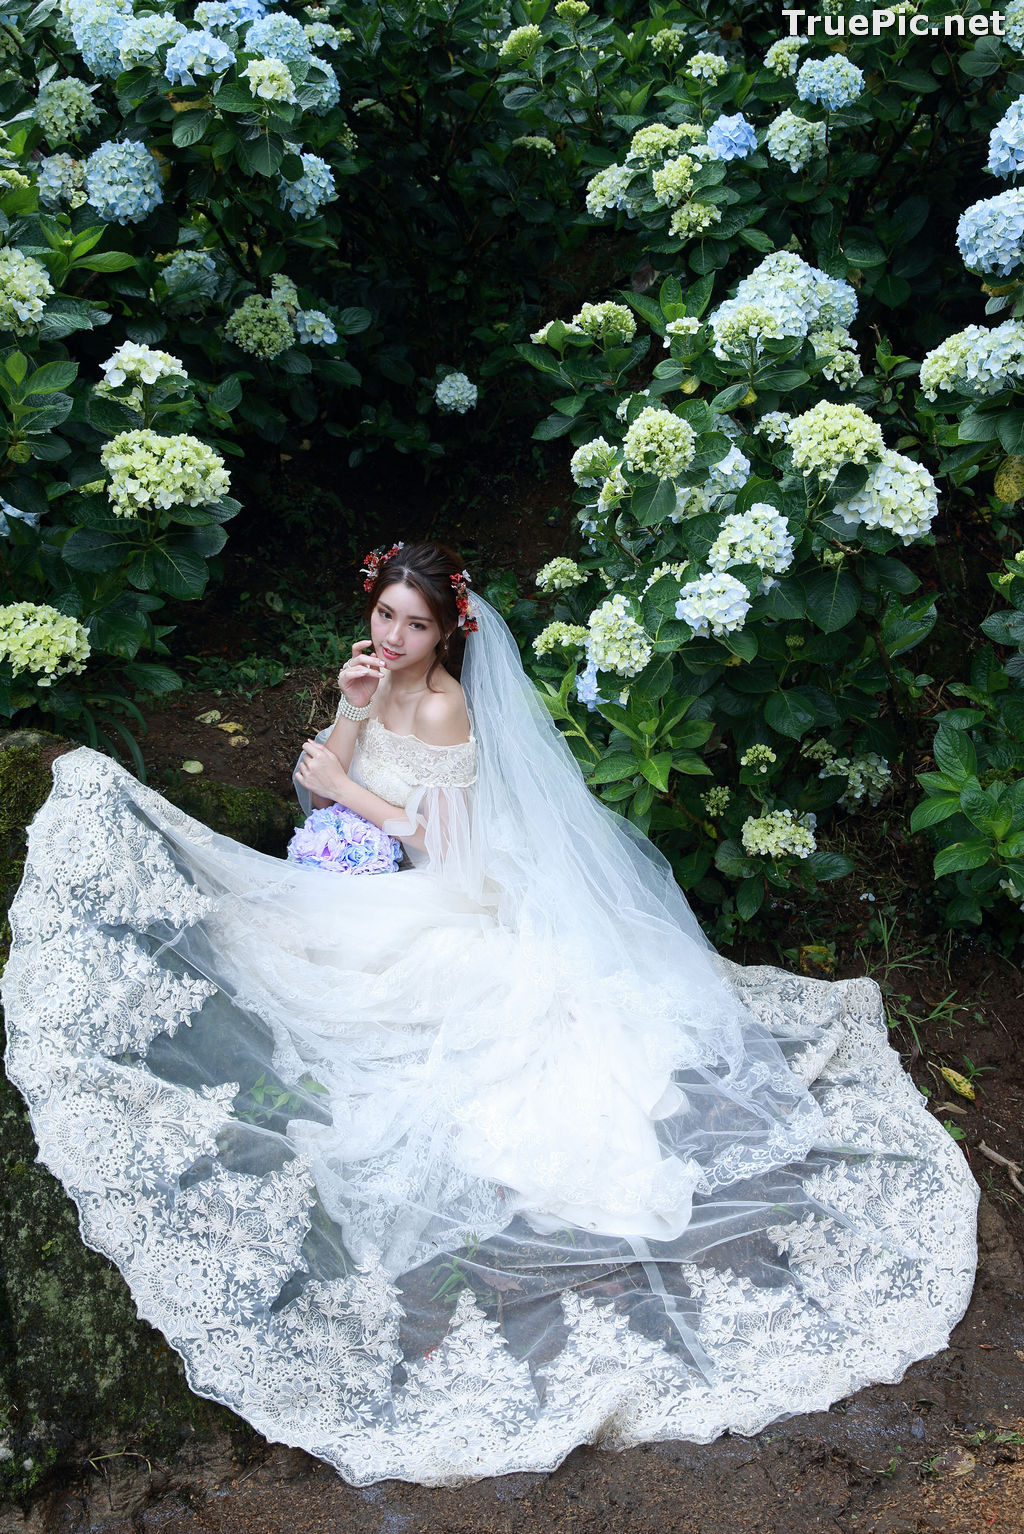 Image Taiwanese Model - 張倫甄 - Beautiful Bride and Hydrangea Flowers - TruePic.net - Picture-42